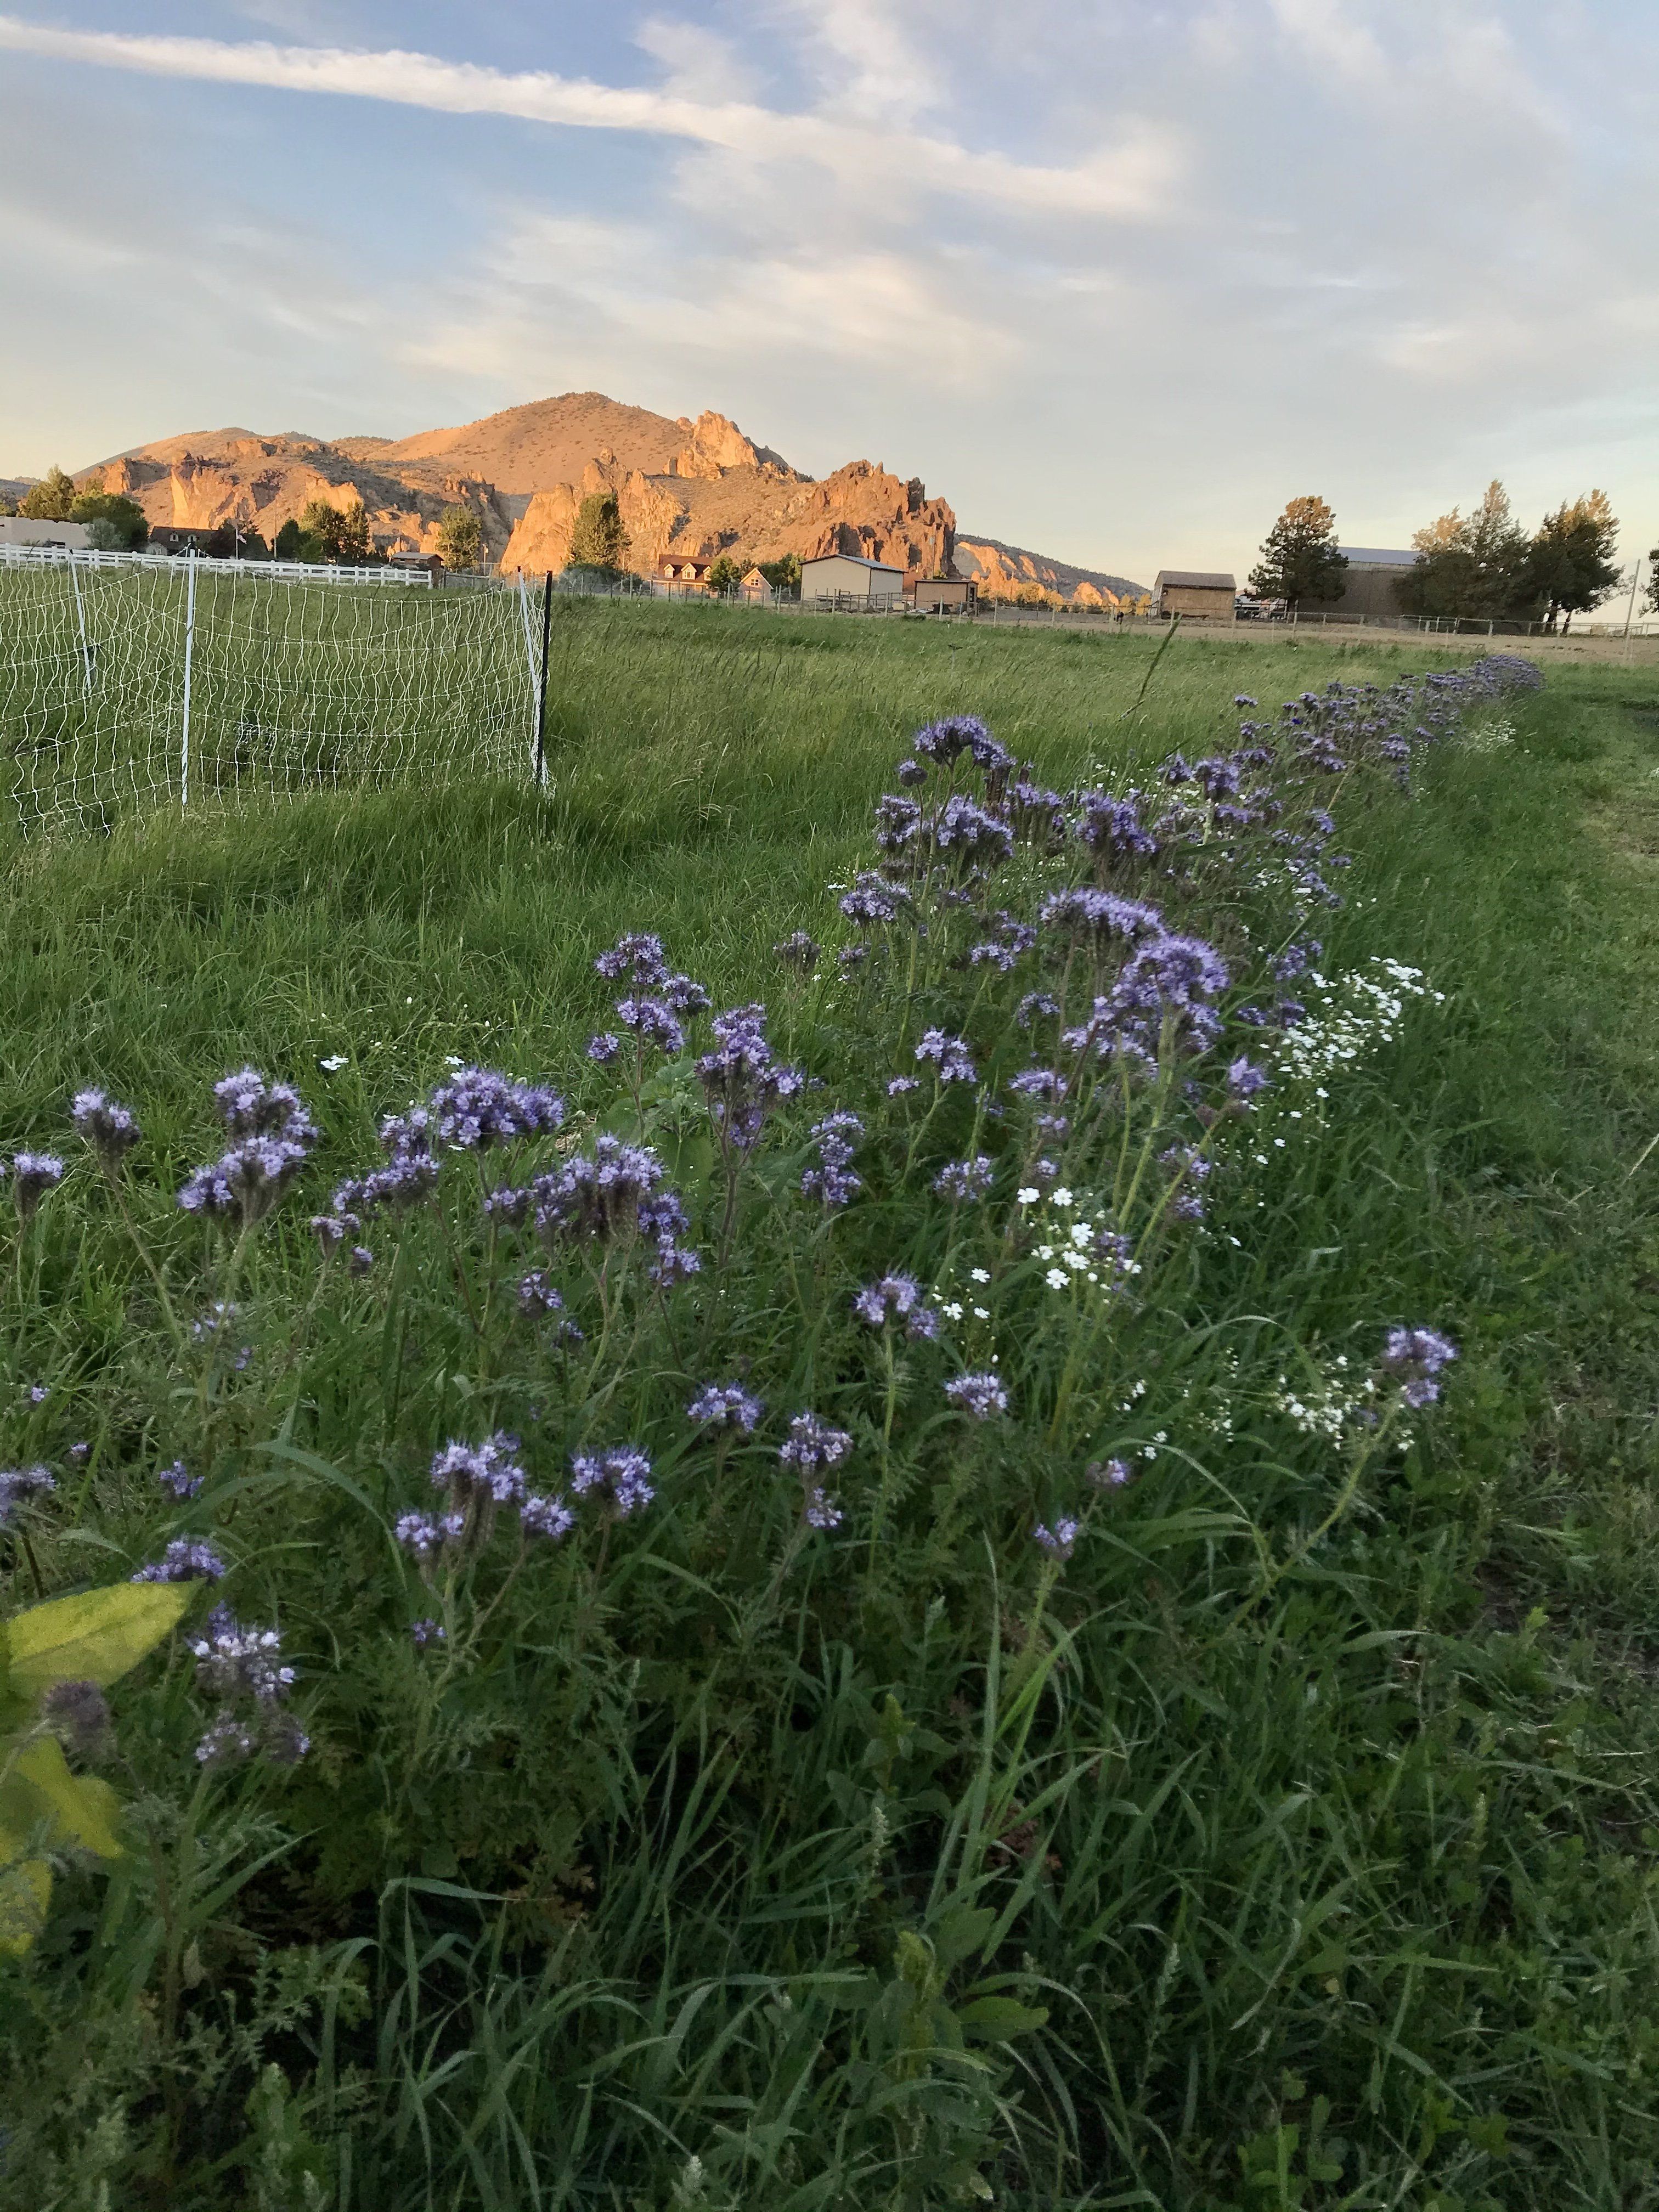 Next Happening: Flowers on the Farm